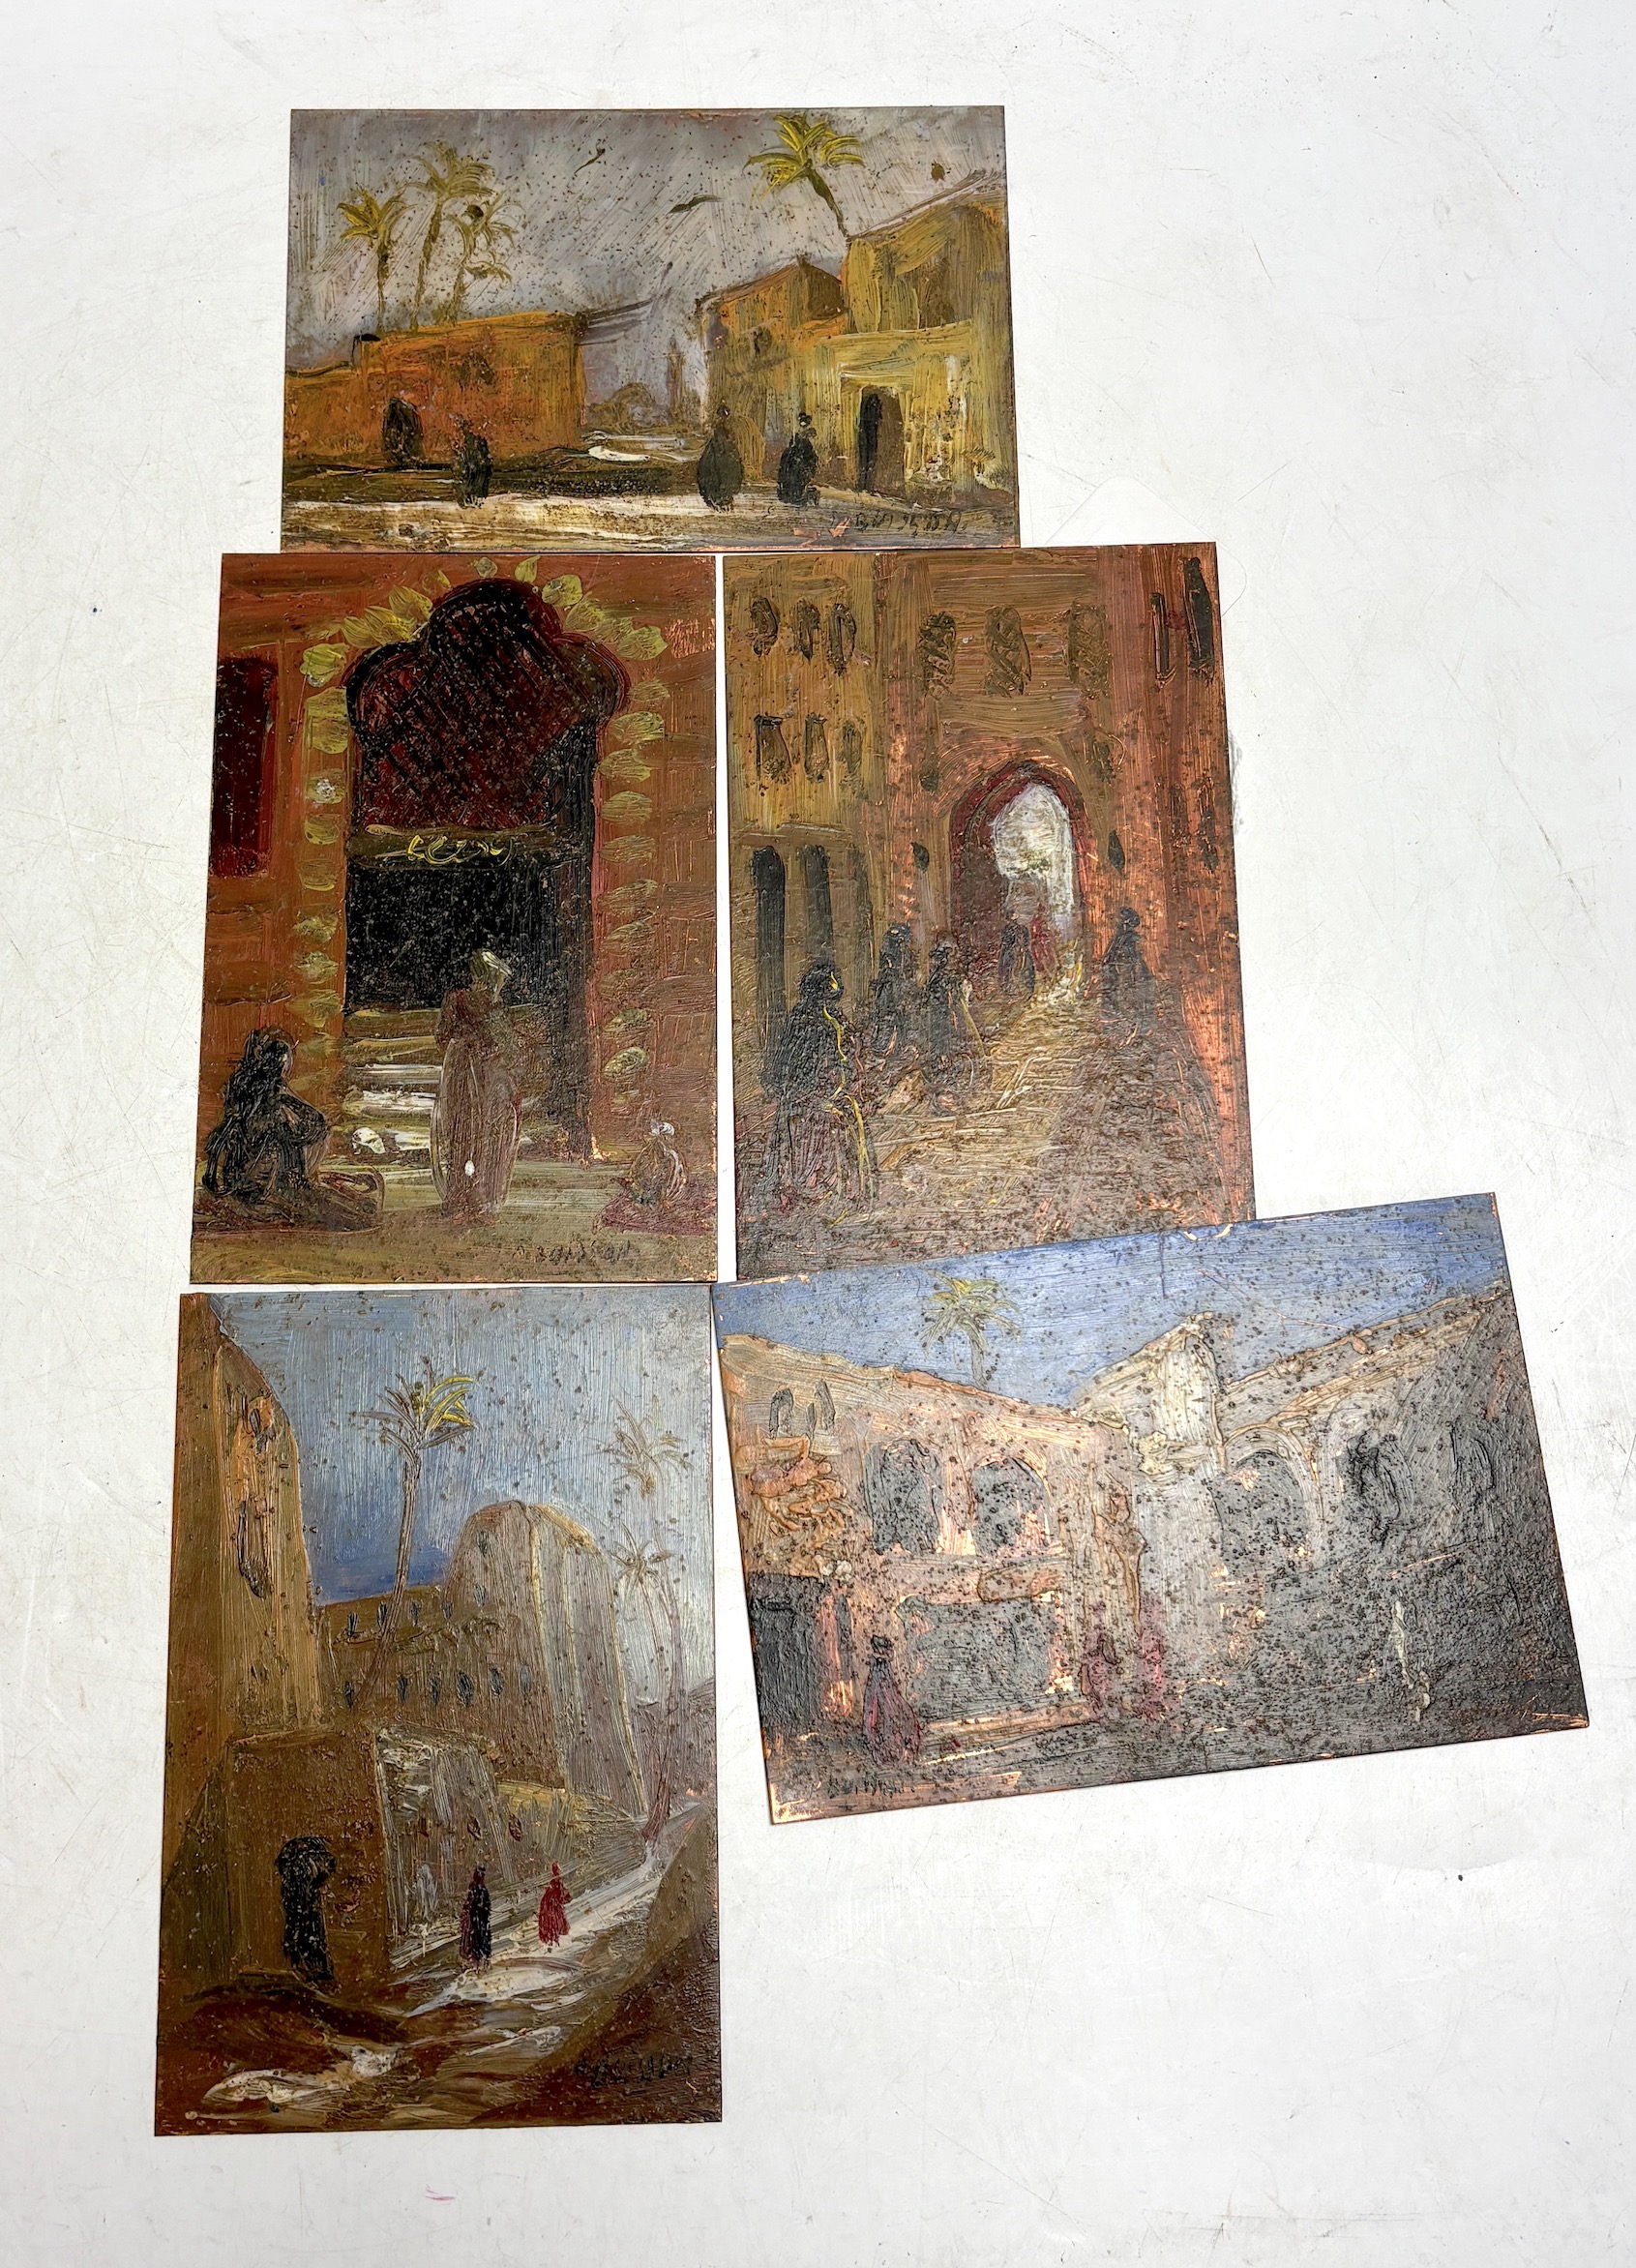 P. Buisson, set of five oils on copper panels, Middle Eastern landscapes with figures, each signed, each 15 x 9.5cm, unframed